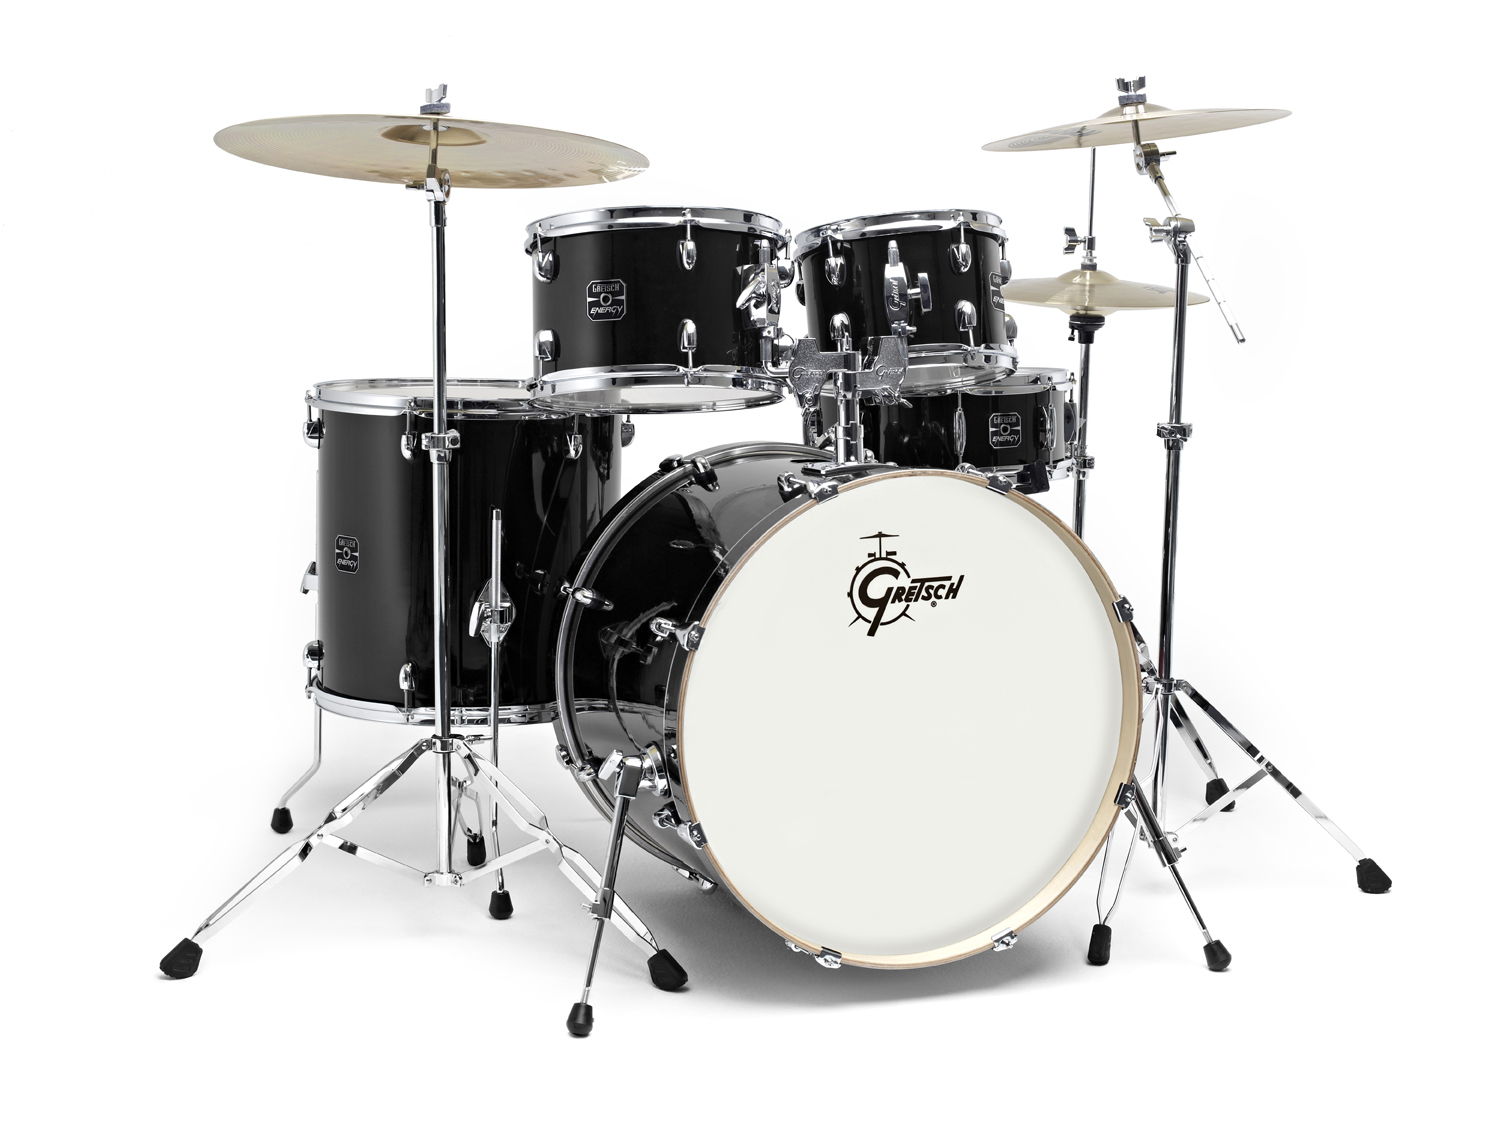 GRETSCH DRUMS GE2-E825TK-BK - NEW ENERGY STAGE 22